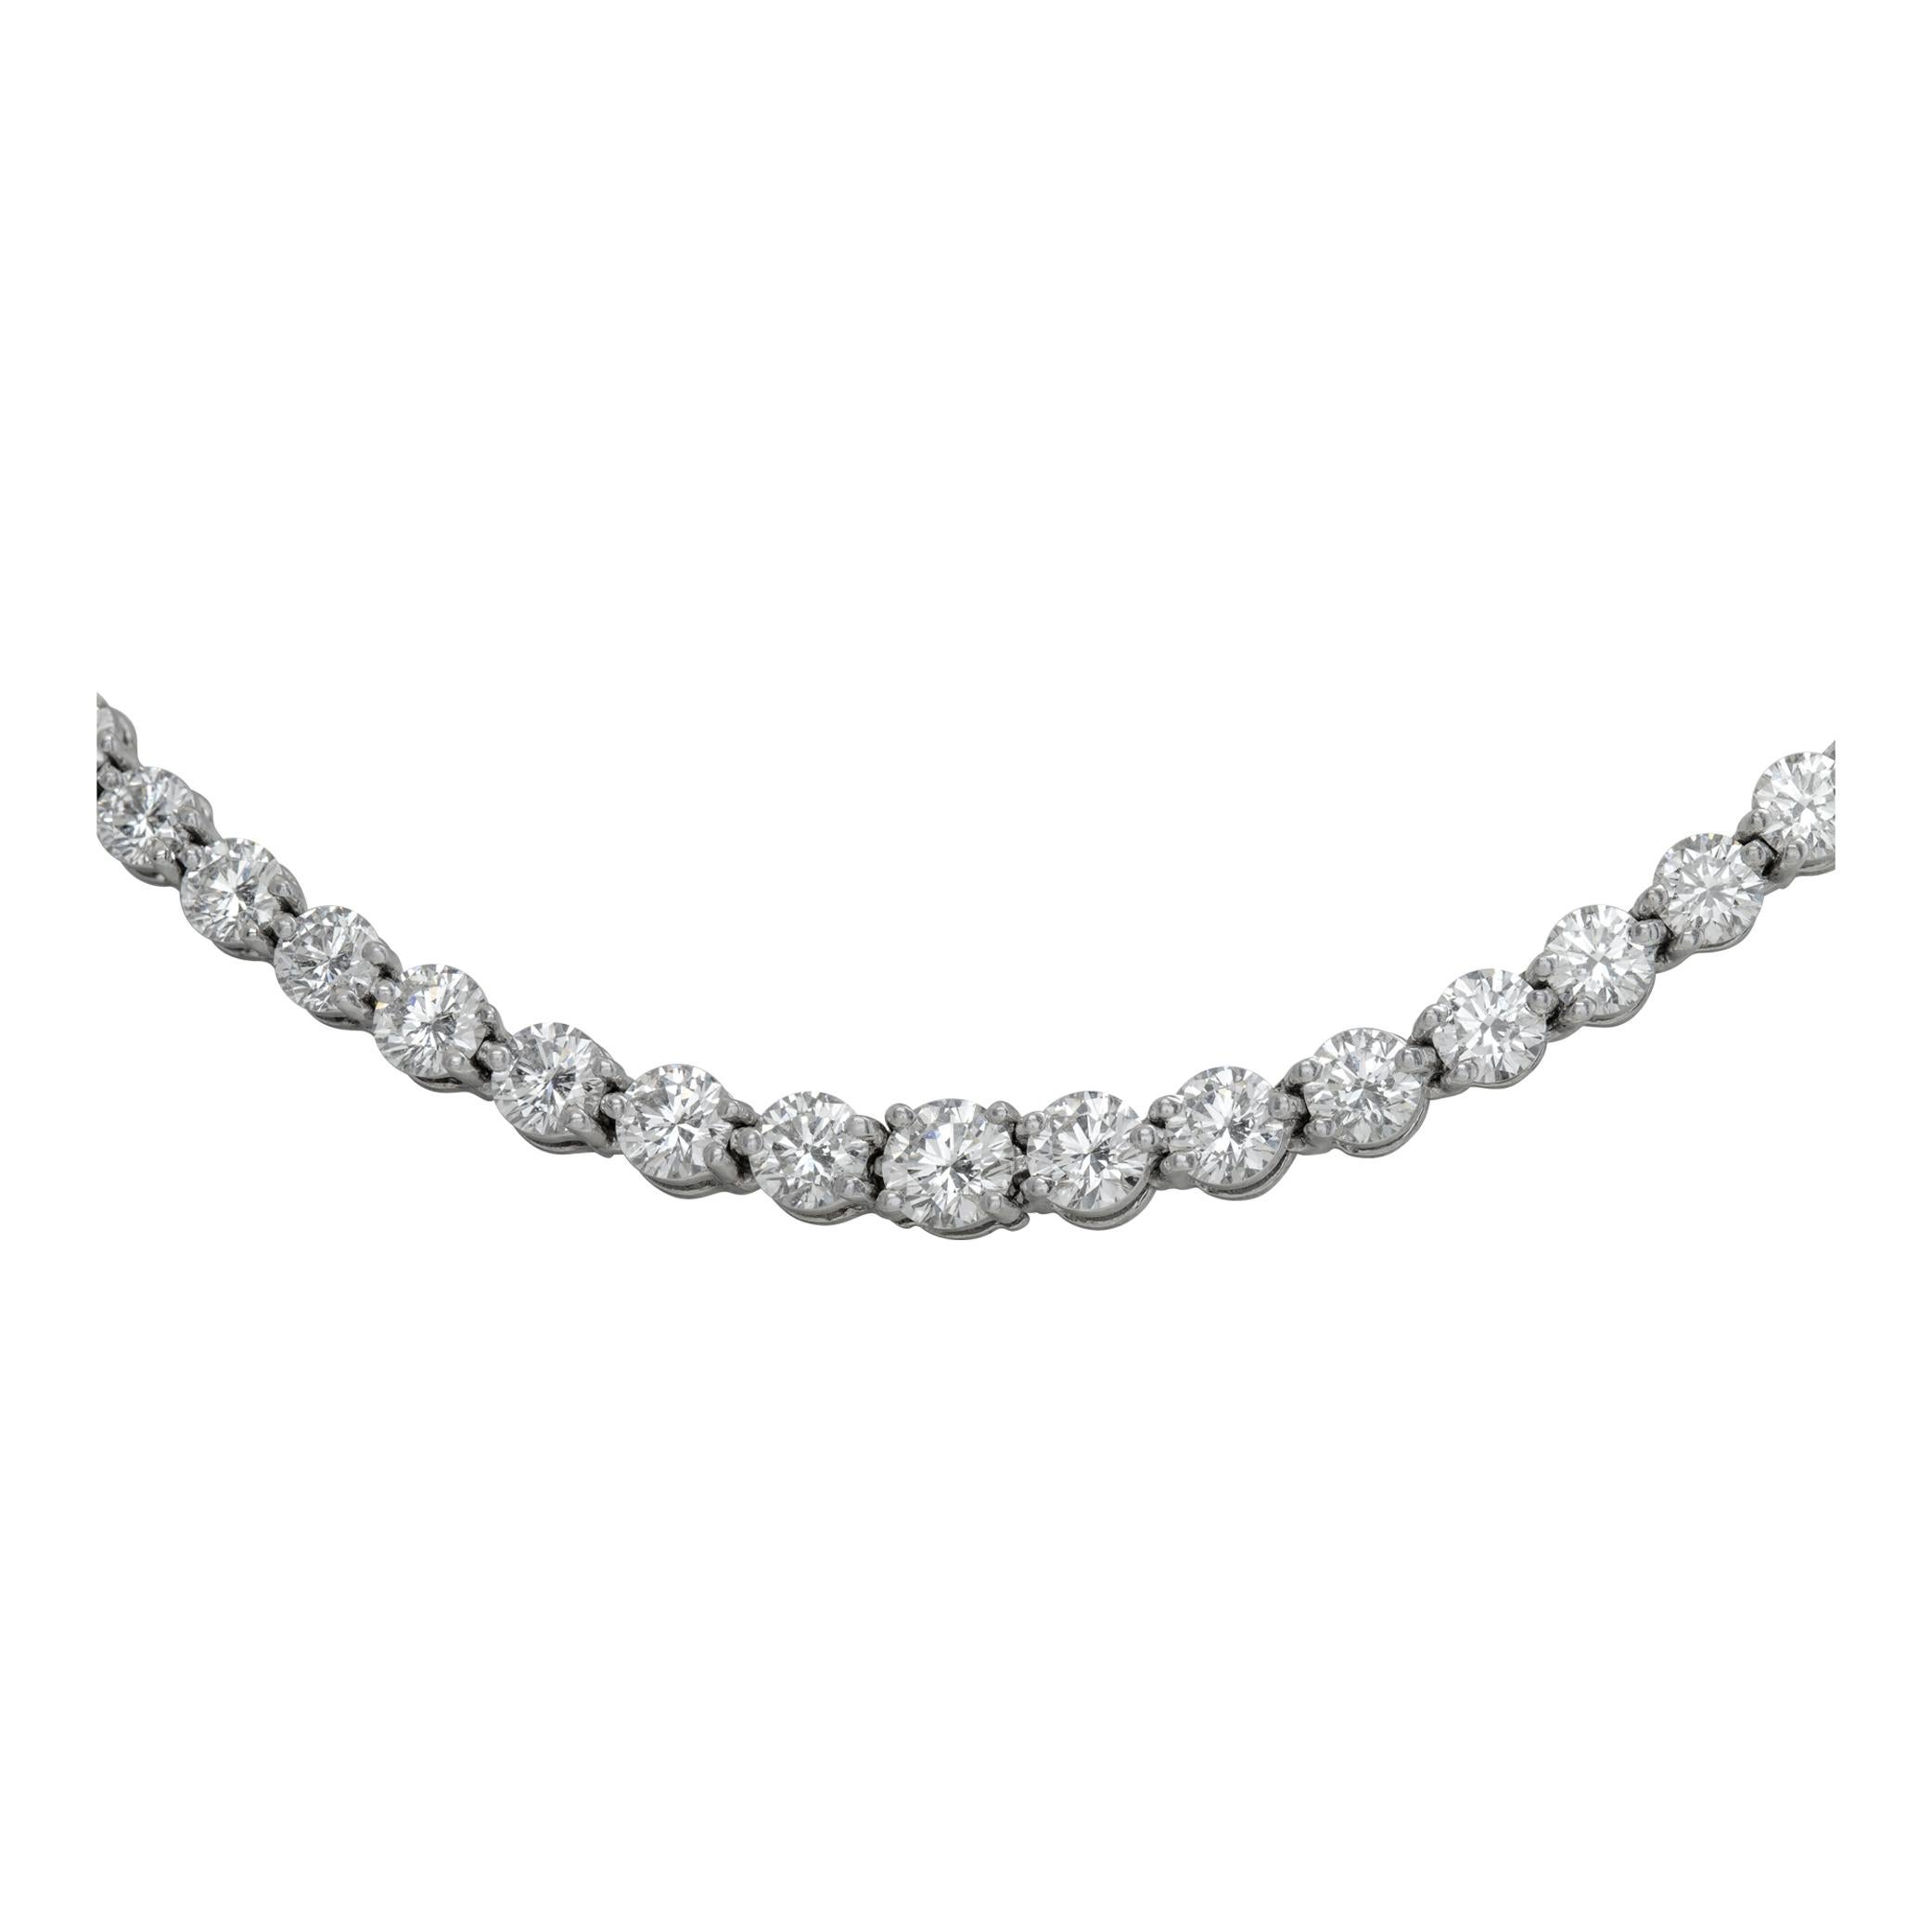 Tiffany & Co. graduated diamond line necklace in platinum from the Victoria collection. Approximately 10.18 carats in round diamonds G-H color,  VVS-VS clarity. Comes in original Tiffany Box and Tiffany Appraisal. 16.5 inch length.
